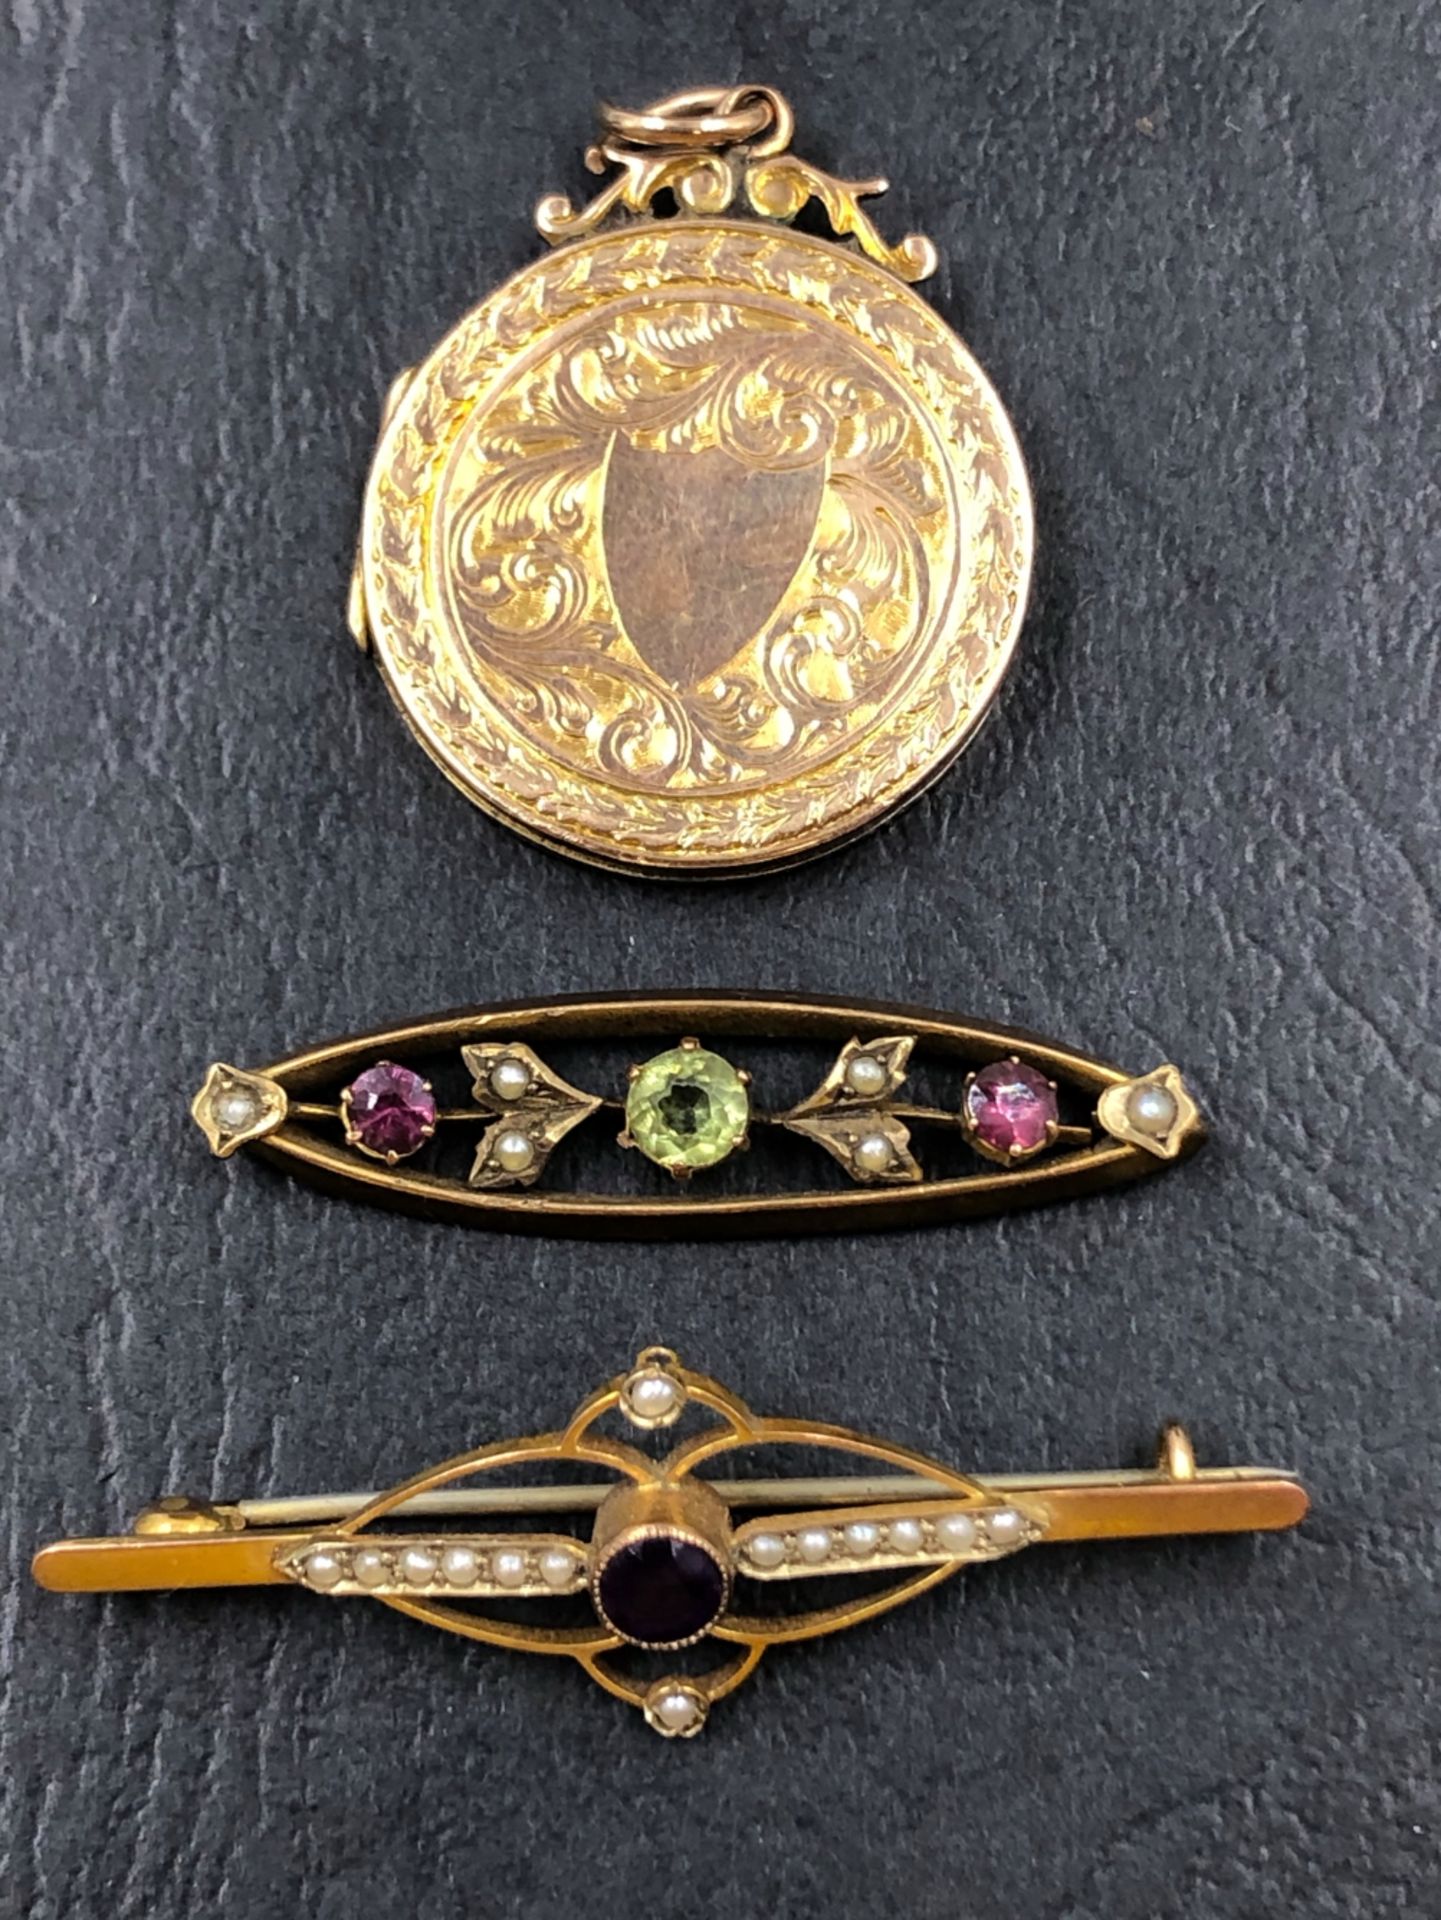 A 9ct GOLD HALLMARKED EDWARDIAN BAR BROOCH, OF SUFFRAGETTE INFLUENCE, FOR C M WRIGHTON, CHESTER